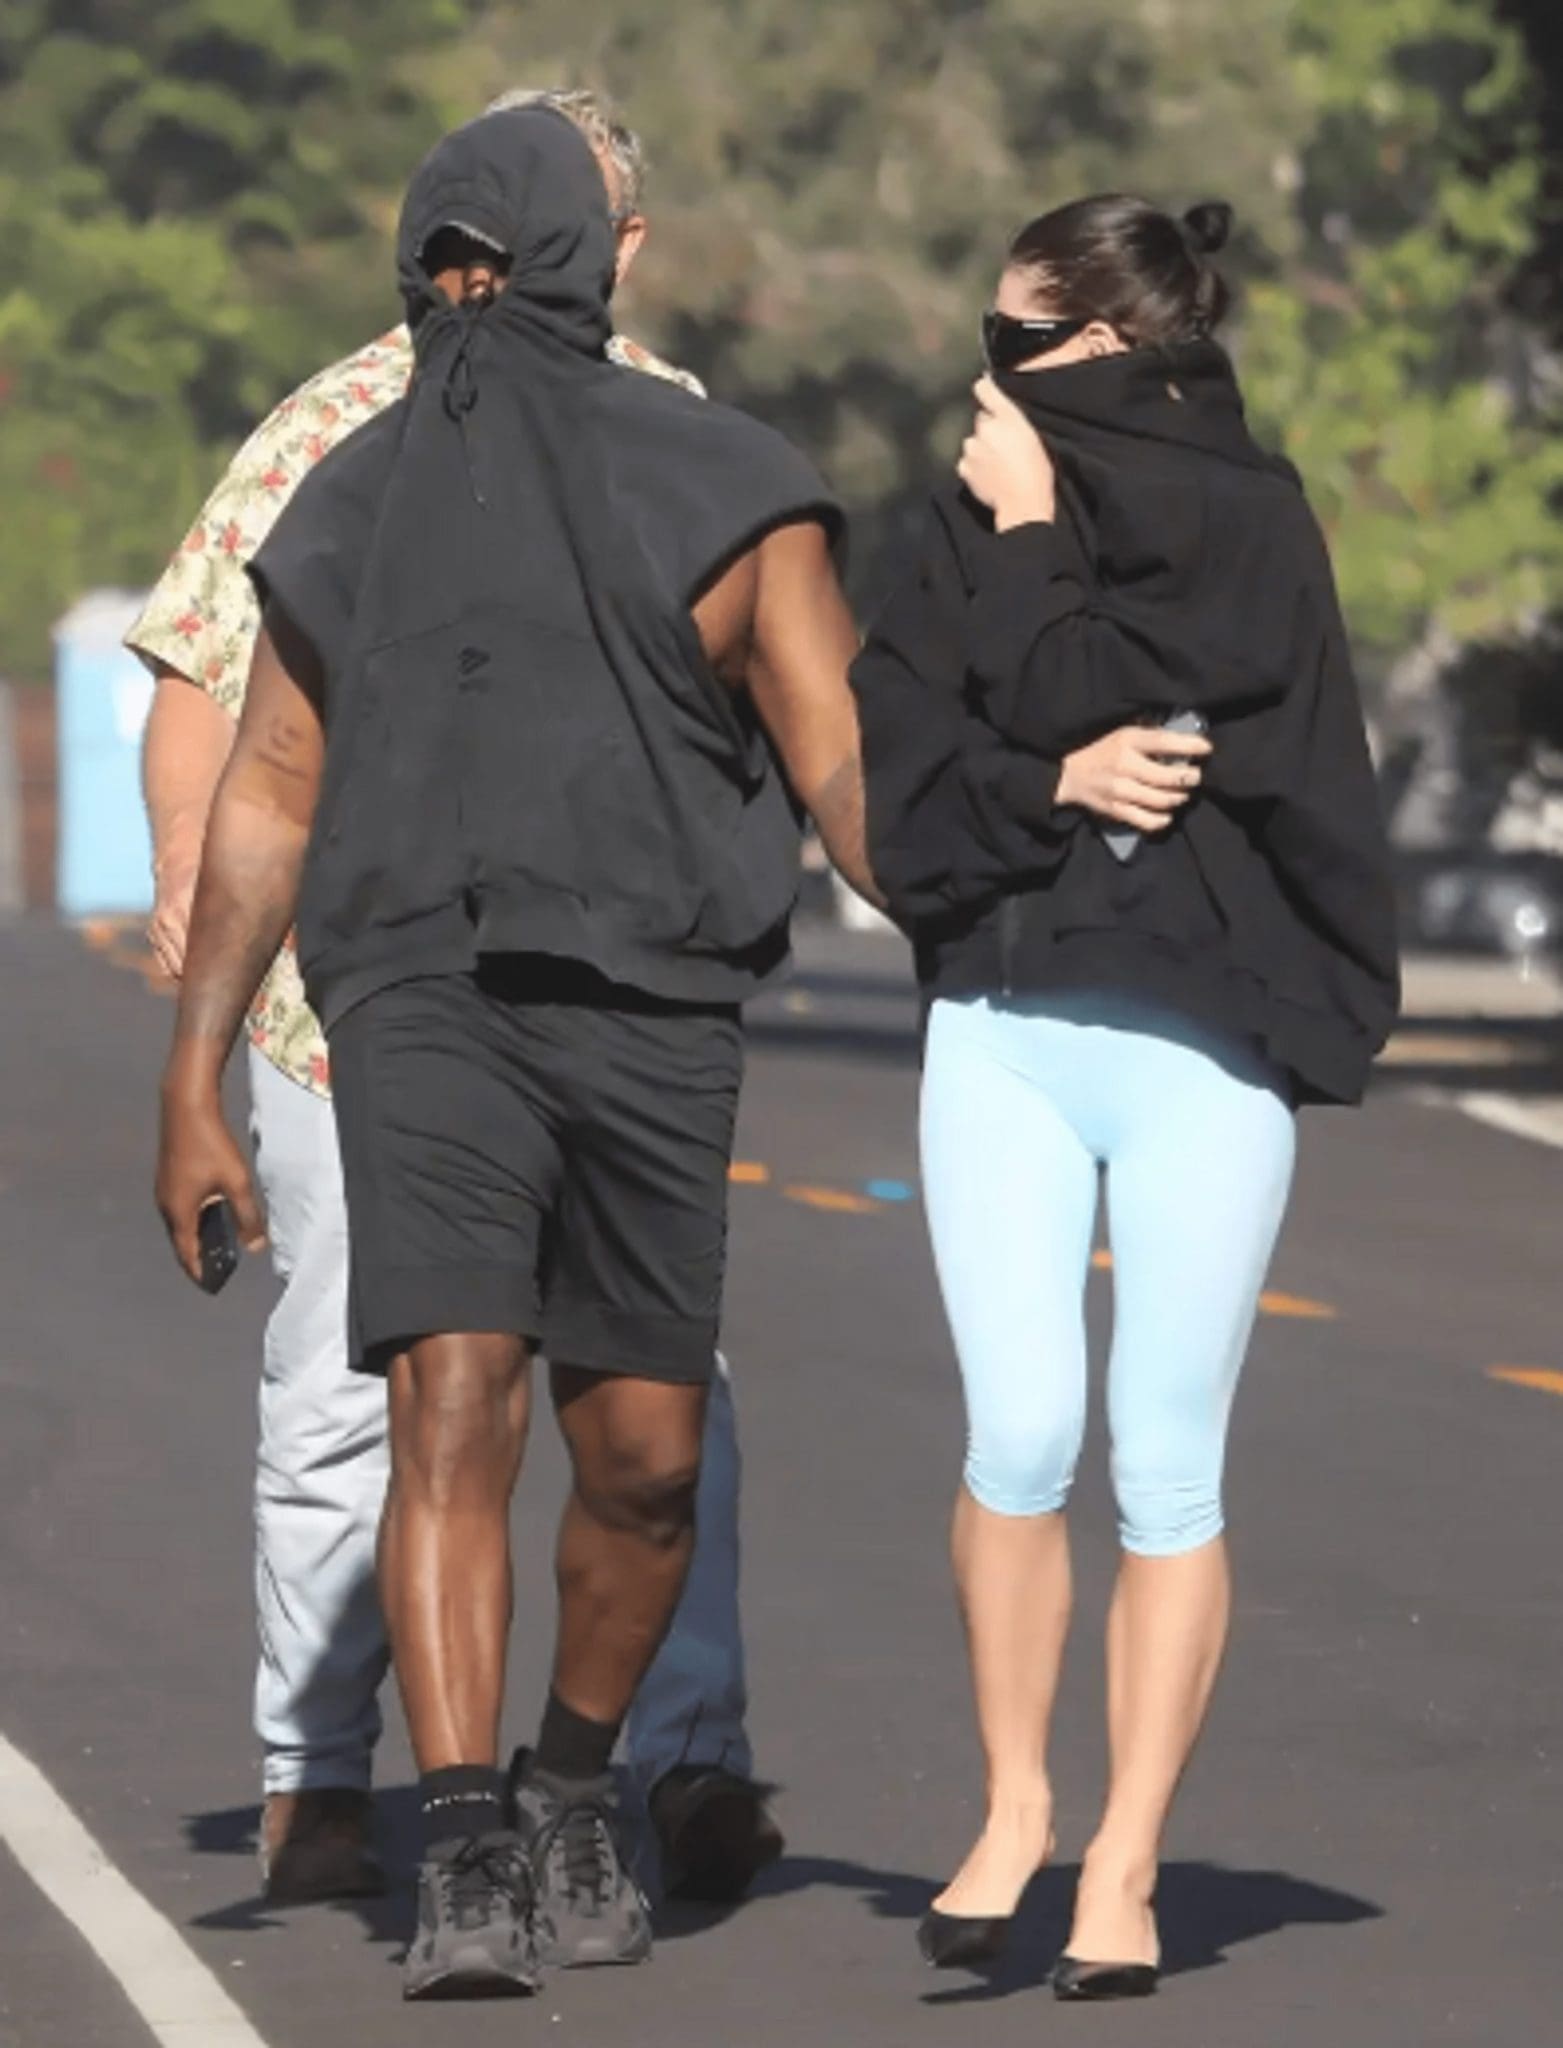 At His Malibu Home, Kanye West Meets With Designers And Builders Beside An Unidentified Woman